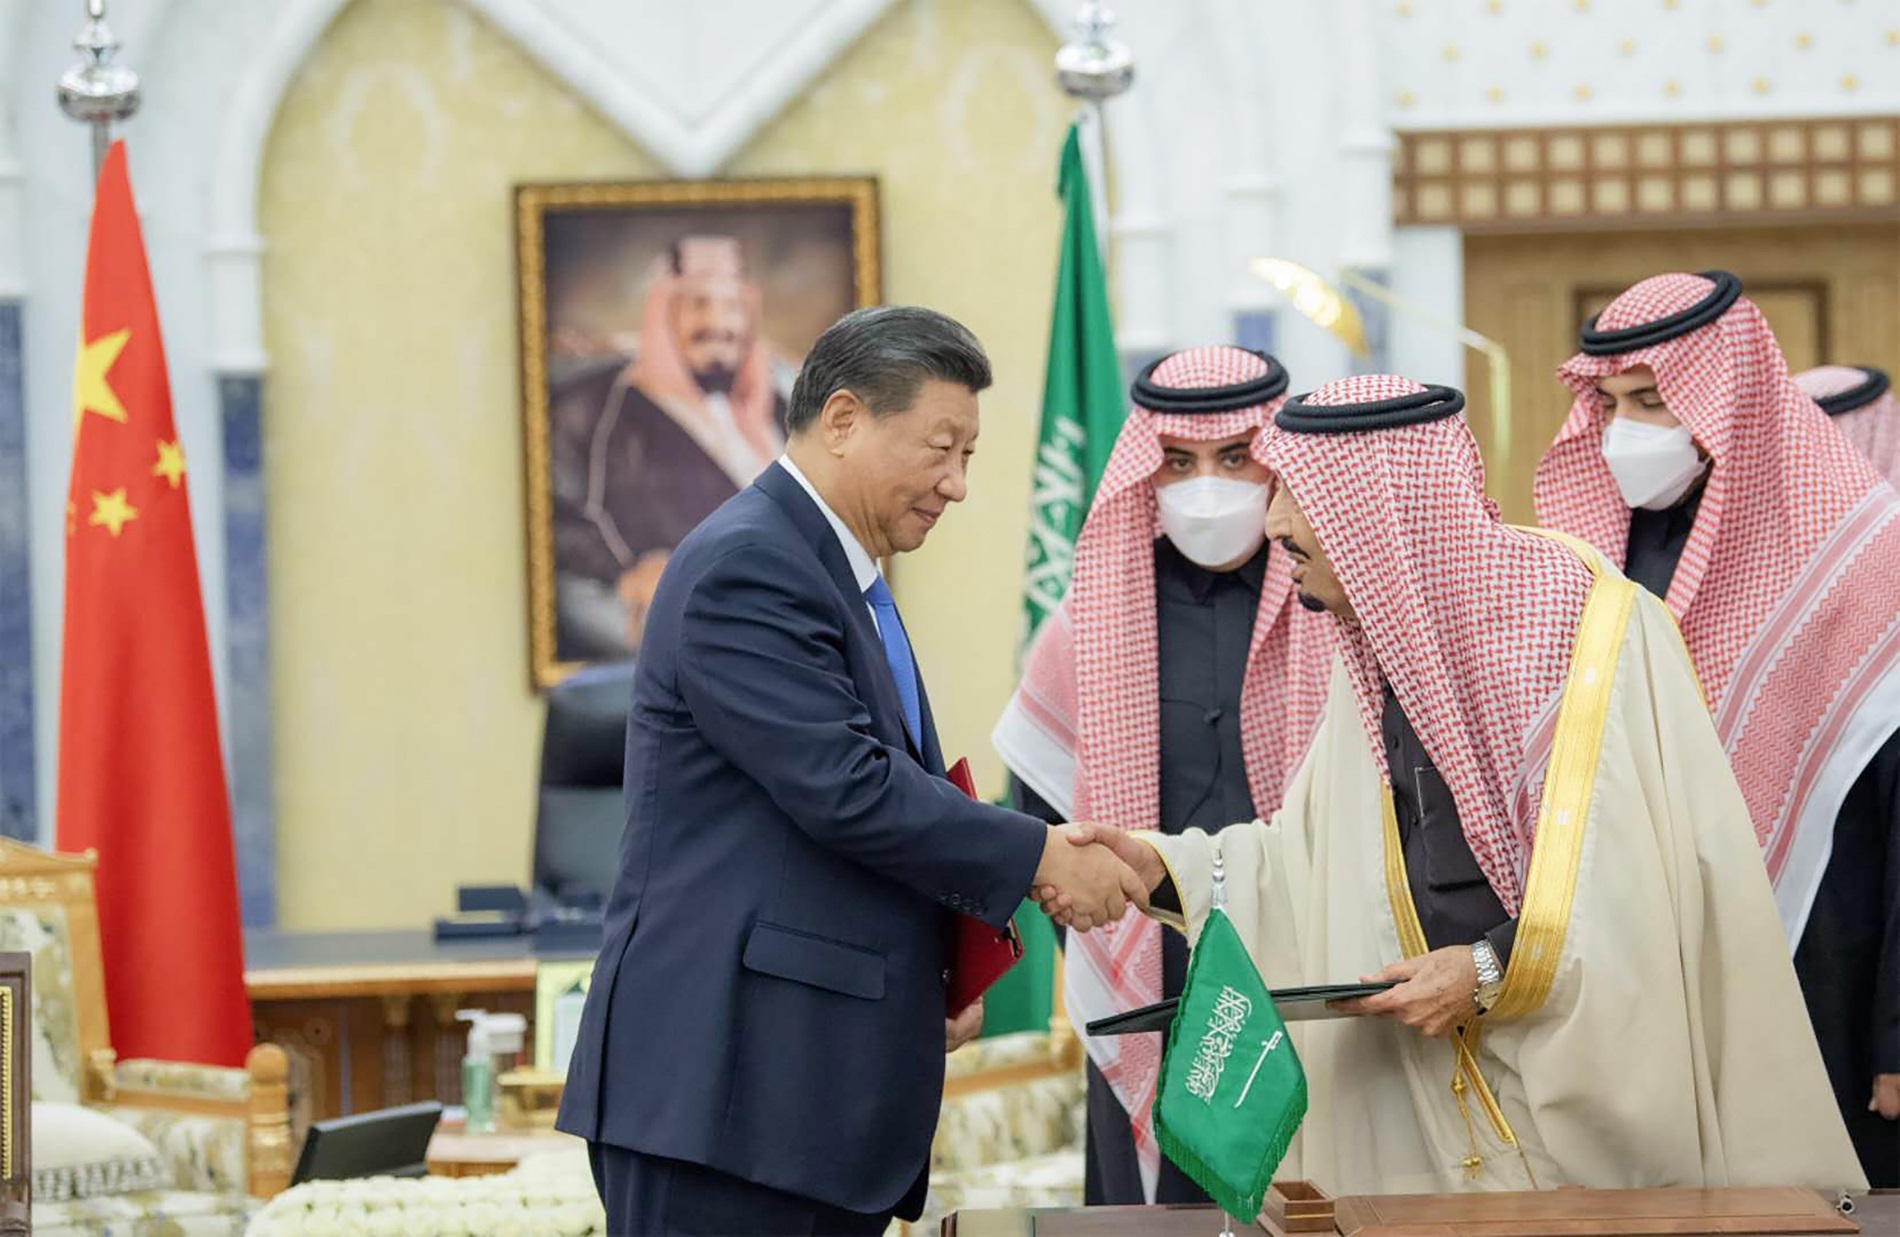 China-Saudi RMB Settlement Will Insulate the Oil Trade from U.S. Sanctions